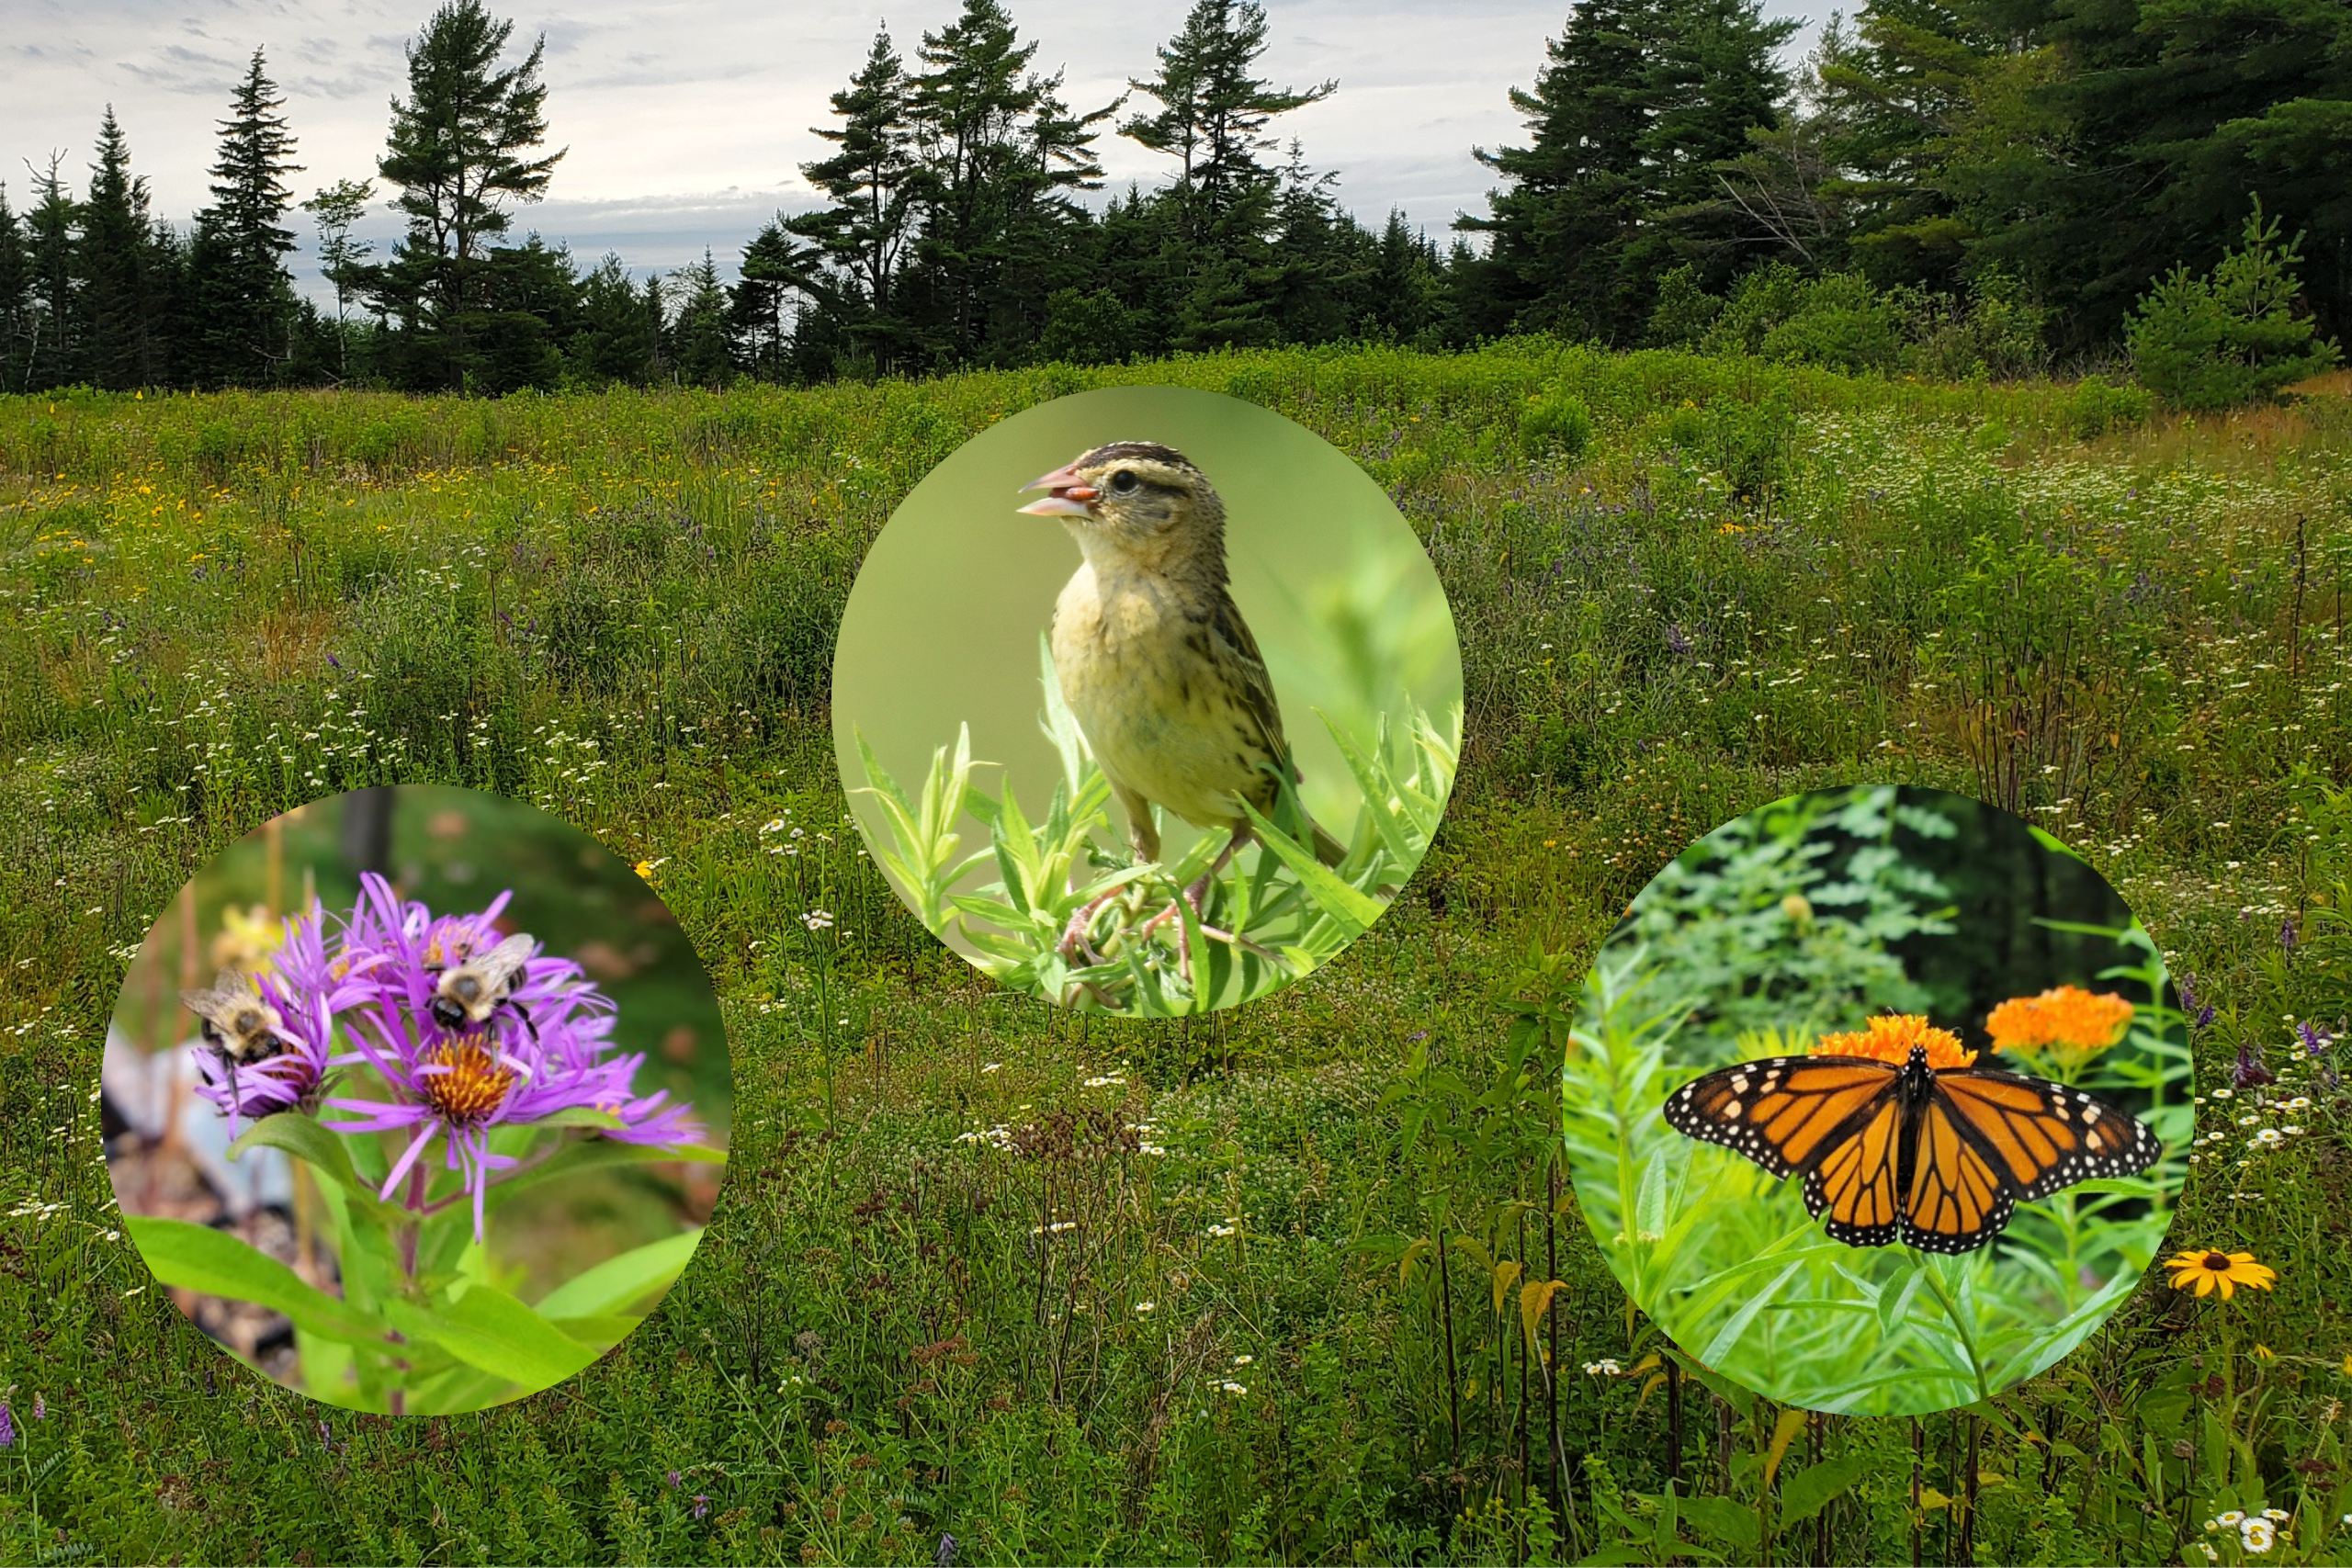 A field with photos of bees, a bobo link bird, and a monarch butterfly added in magnified circles.